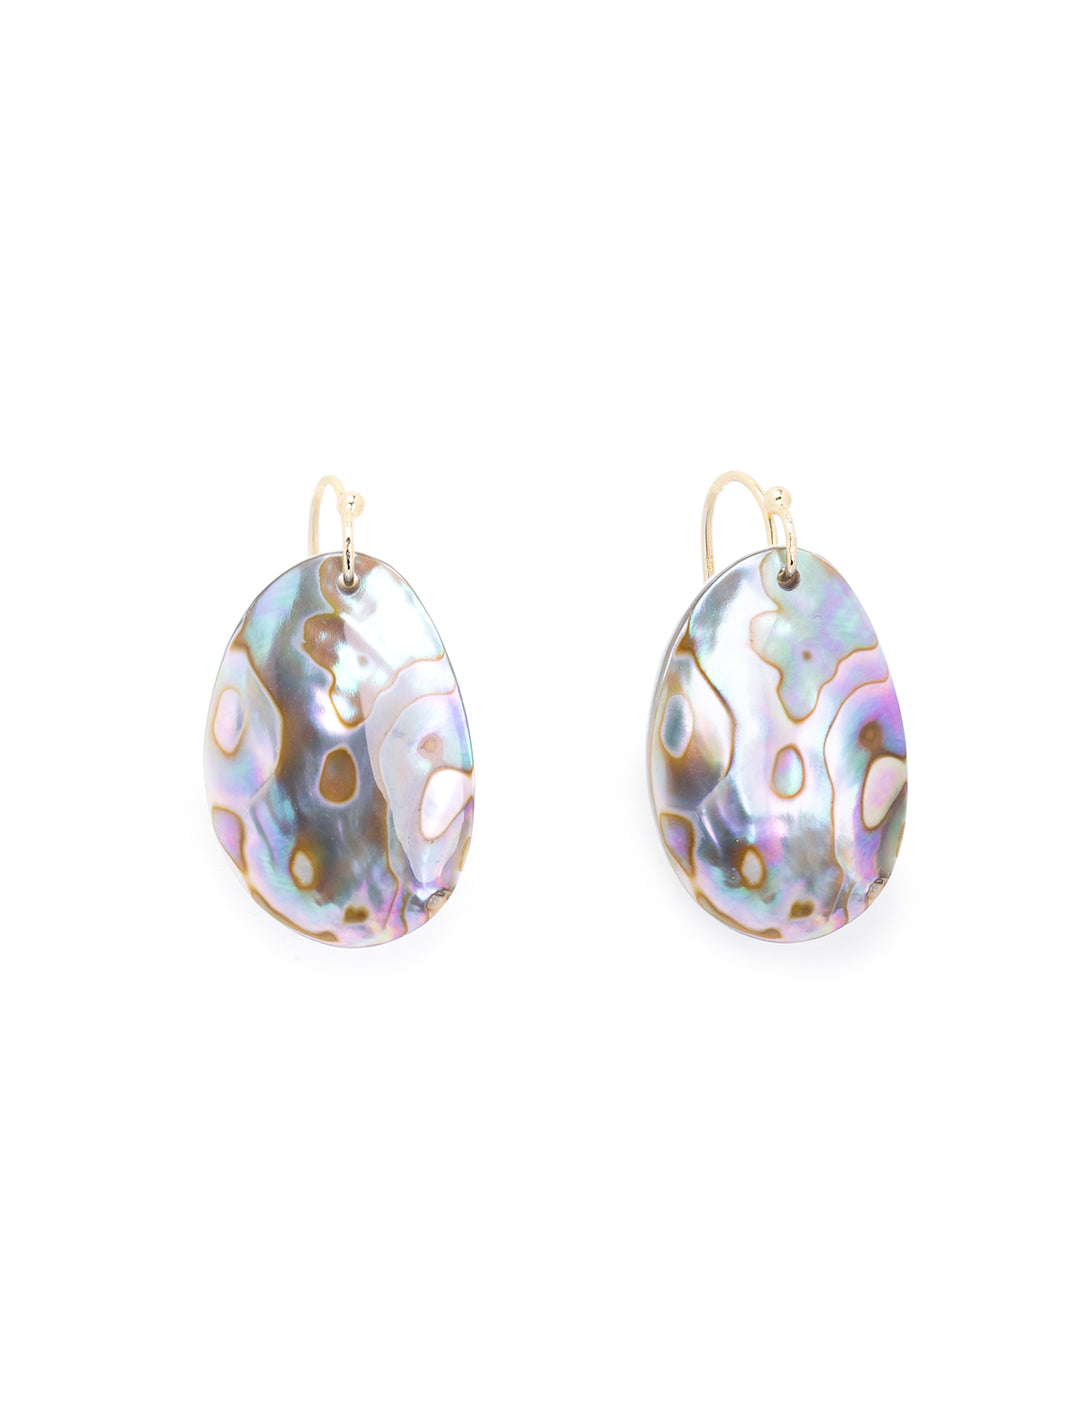 Front view of AV Max's organic abalone and mother of pearl earrings.